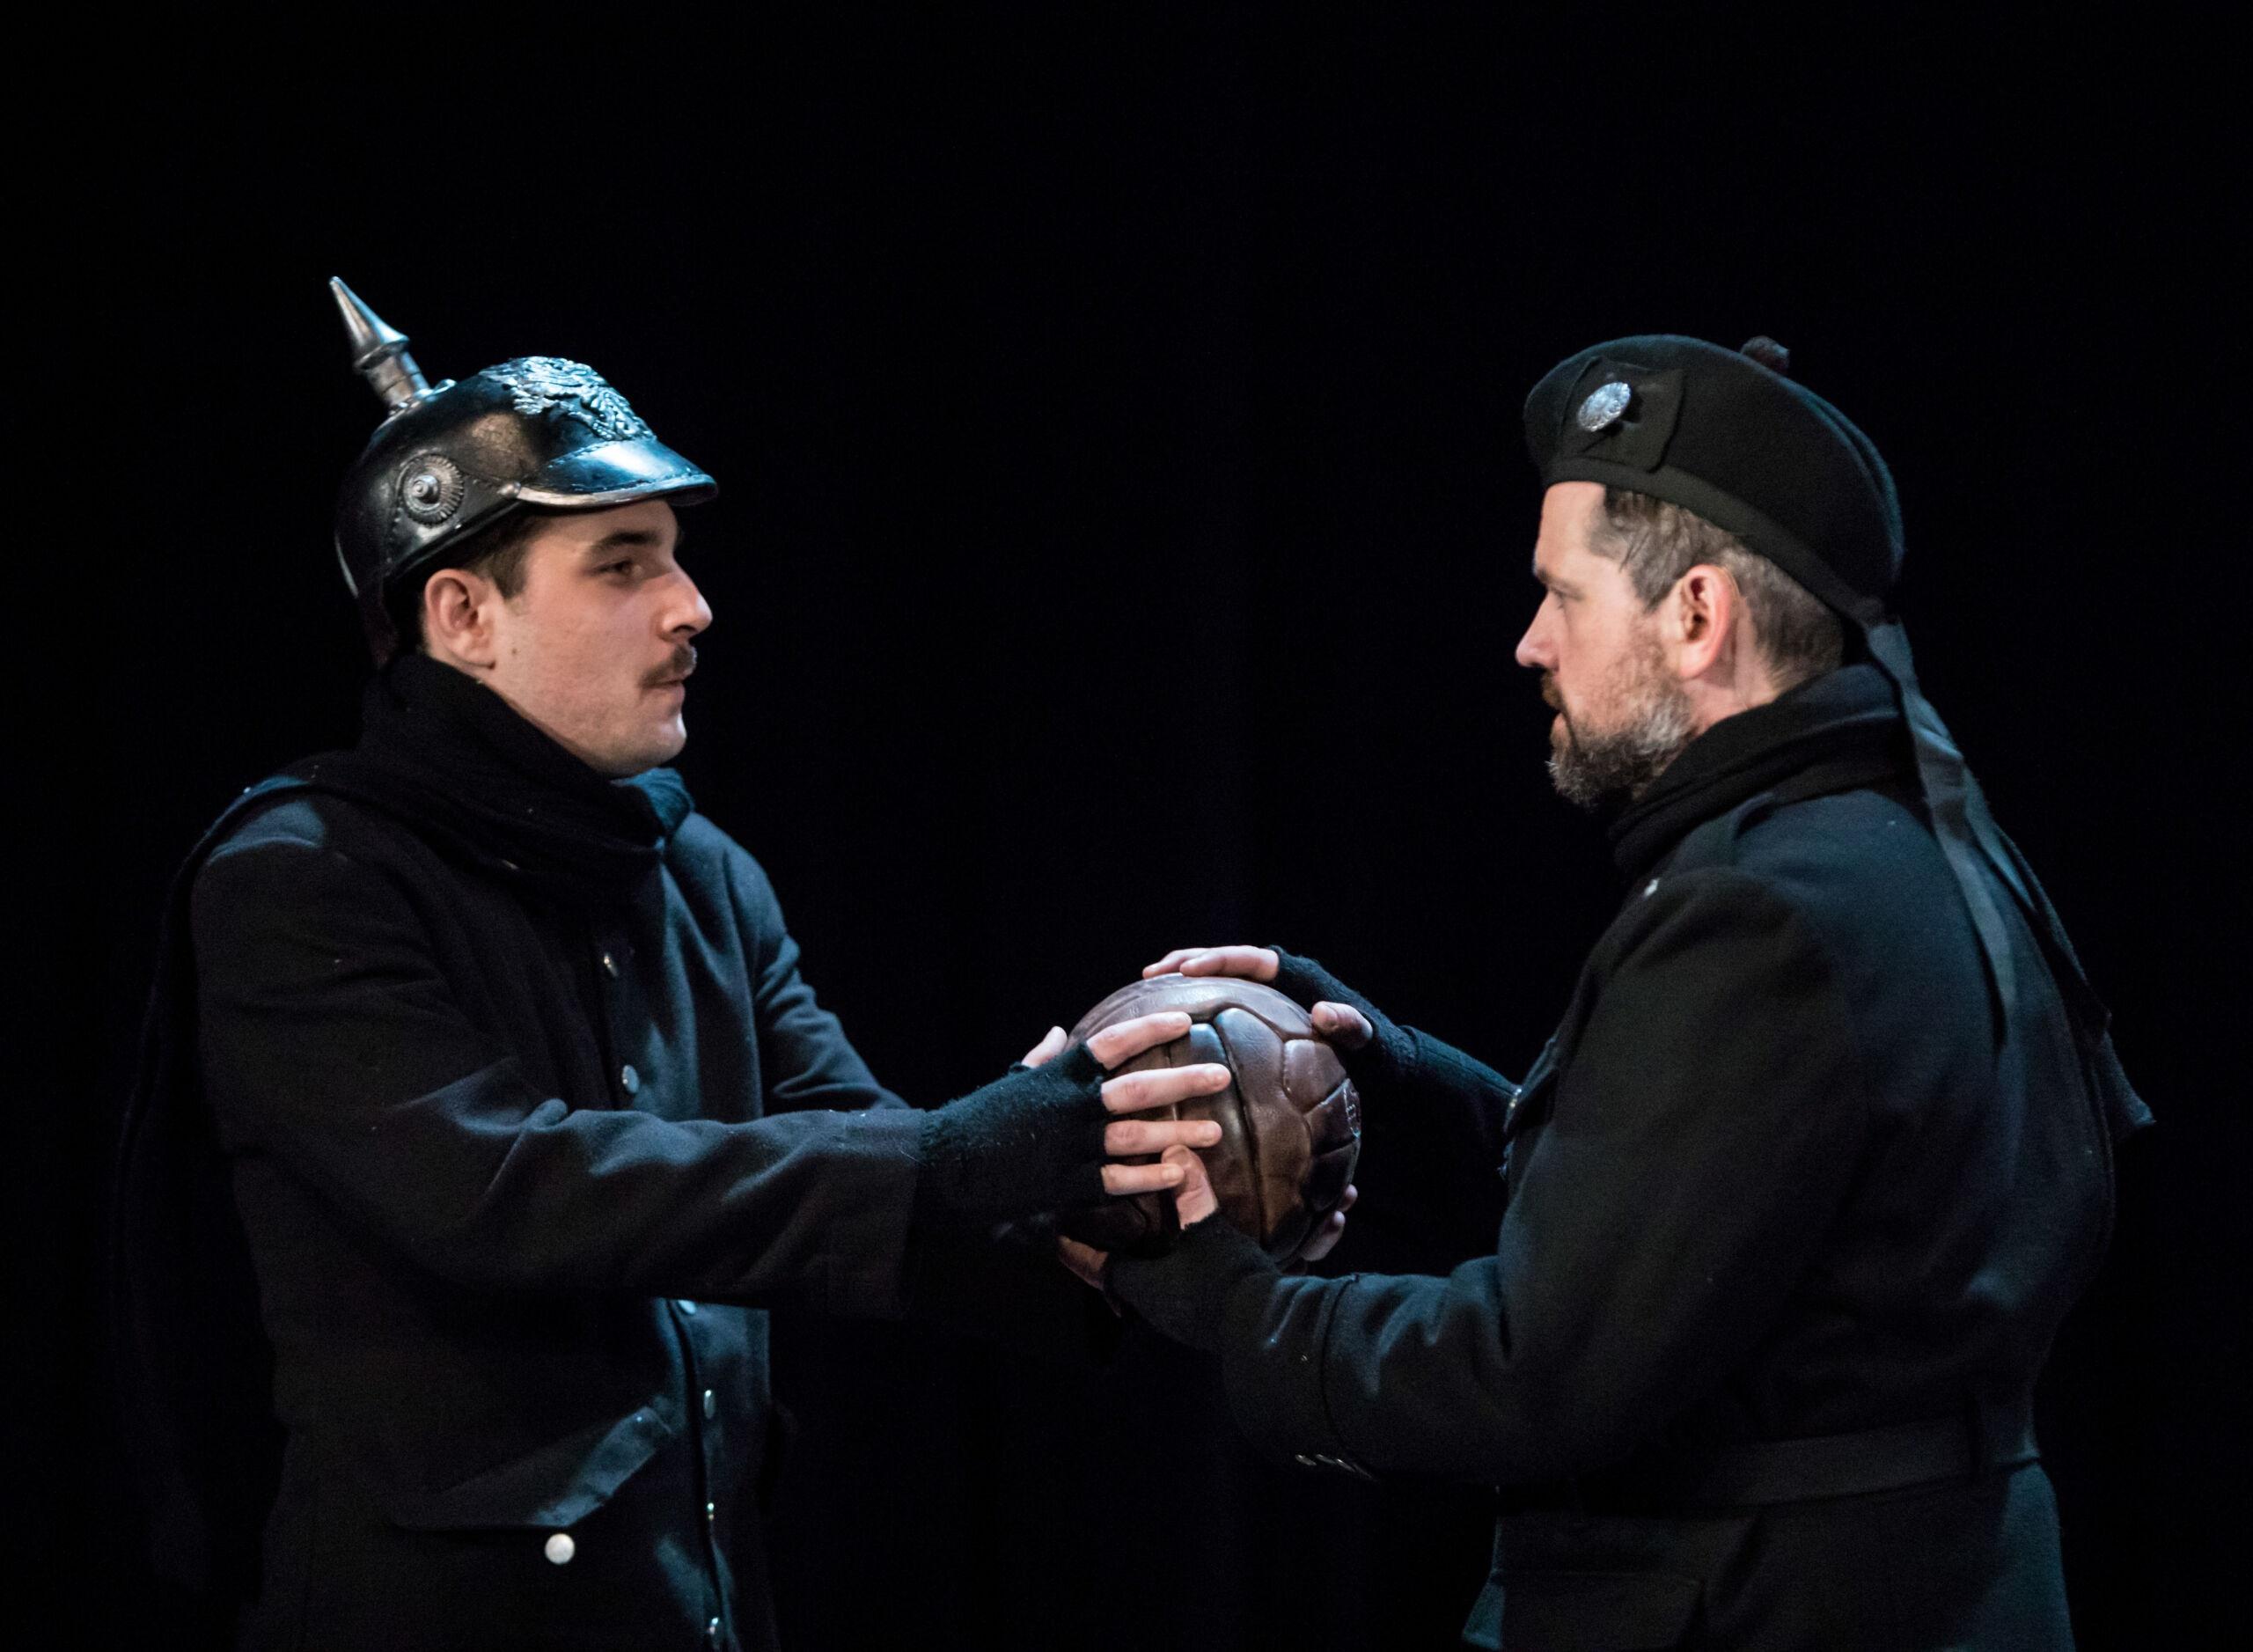 Benjamin Dutcher and Andrew Wilkowske in “All Is Calm: The Christmas Truce of 1914.”